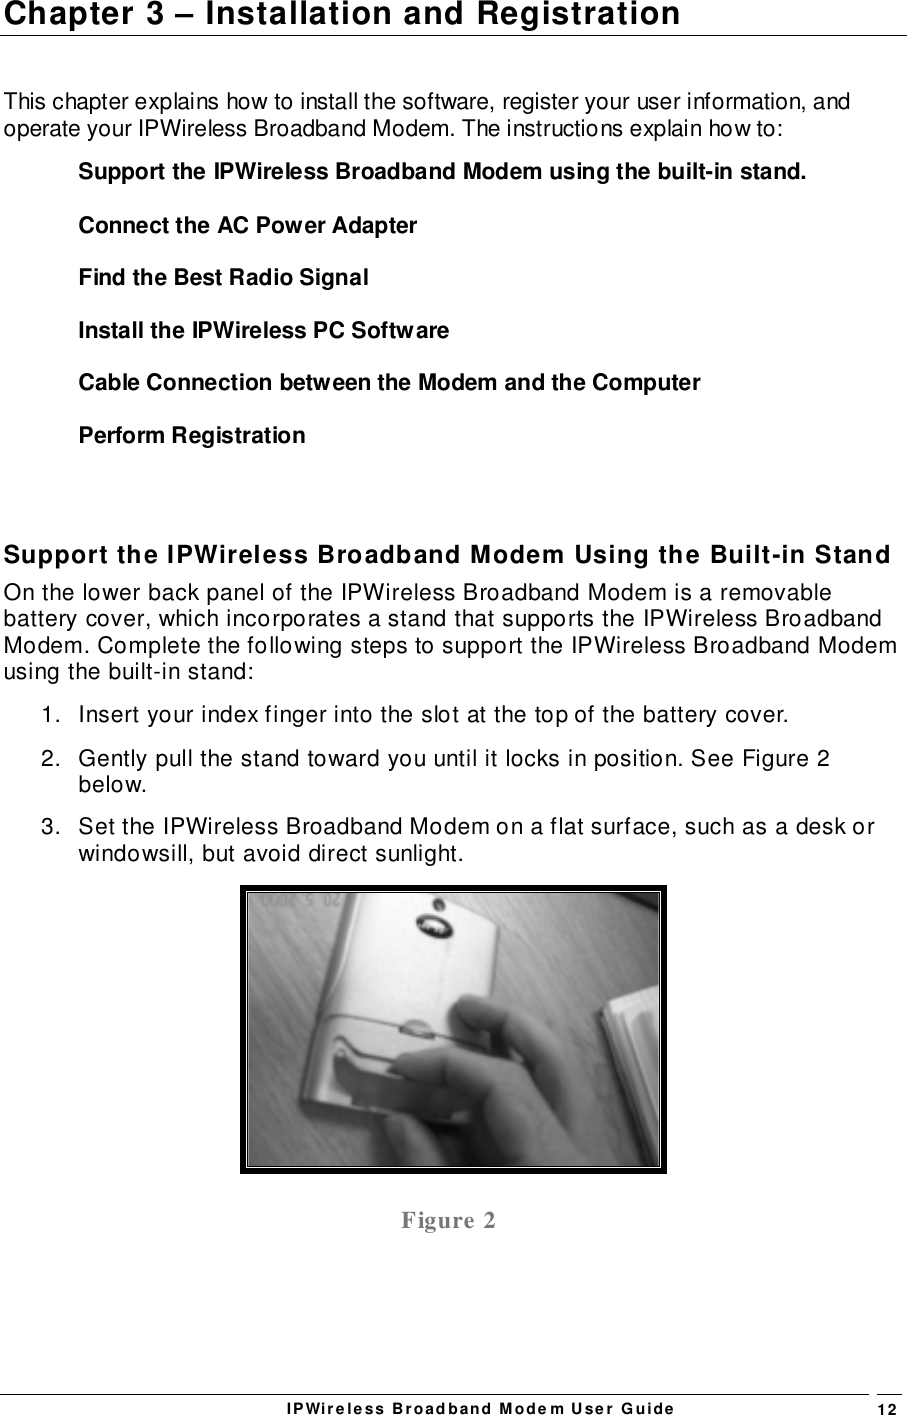 IPWireless Broadband Modem User Guide 12Chapter 3 – Installation and RegistrationThis chapter explains how to install the software, register your user information, andoperate your IPWireless Broadband Modem. The instructions explain how to:Support the IPWireless Broadband Modem using the built-in stand.Connect the AC Power AdapterFind the Best Radio SignalInstall the IPWireless PC SoftwareCable Connection between the Modem and the ComputerPerform RegistrationSupport the IPWireless Broadband Modem Using the Built-in StandOn the lower back panel of the IPWireless Broadband Modem is a removablebattery cover, which incorporates a stand that supports the IPWireless BroadbandModem. Complete the following steps to support the IPWireless Broadband Modemusing the built-in stand:1.  Insert your index finger into the slot at the top of the battery cover.2.  Gently pull the stand toward you until it locks in position. See Figure 2below.3.  Set the IPWireless Broadband Modem on a flat surface, such as a desk orwindowsill, but avoid direct sunlight.Figure 2